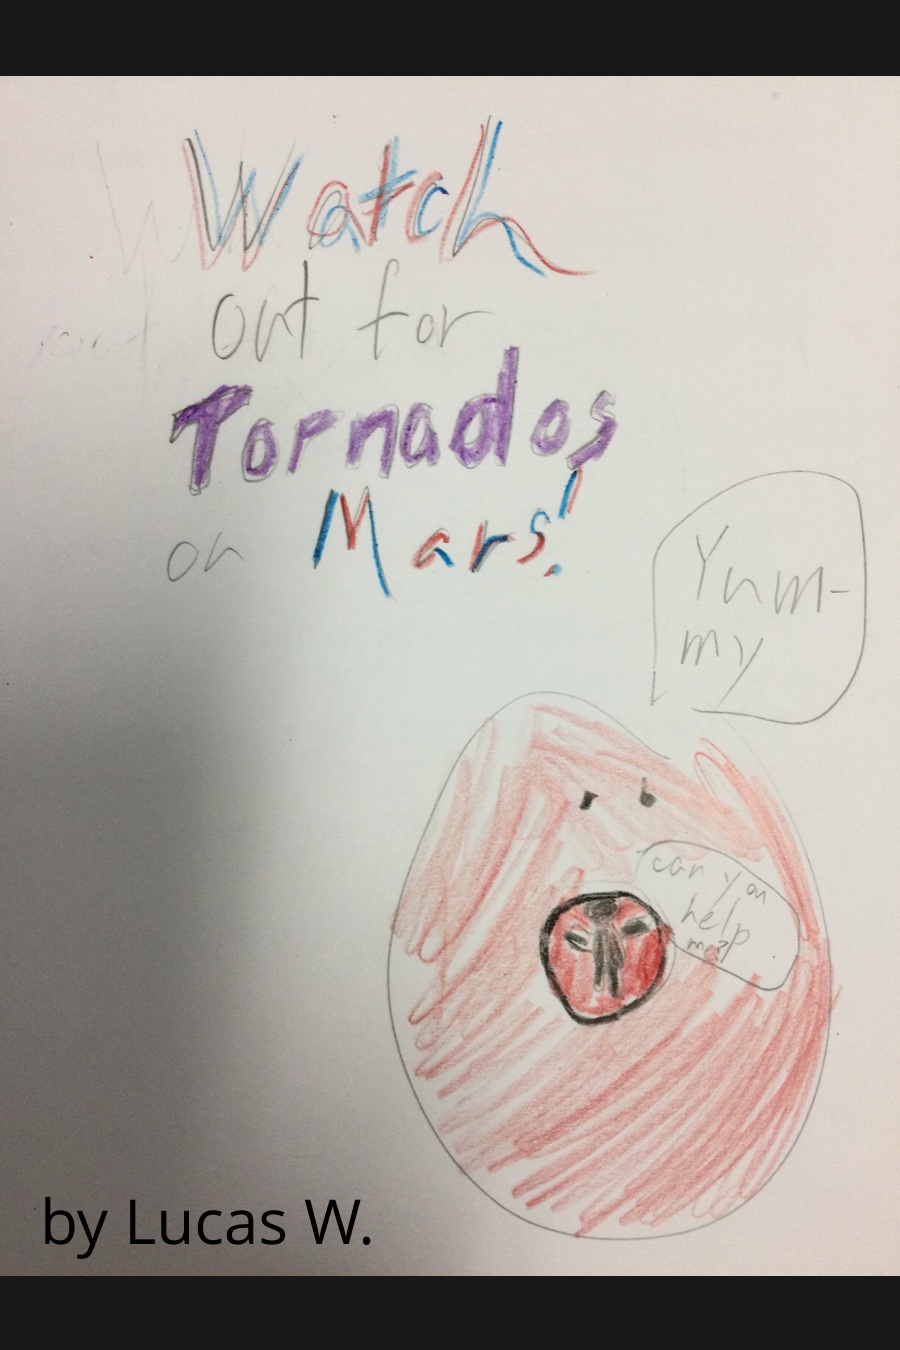 Watch Out For Tornados On Mars by Lucas W